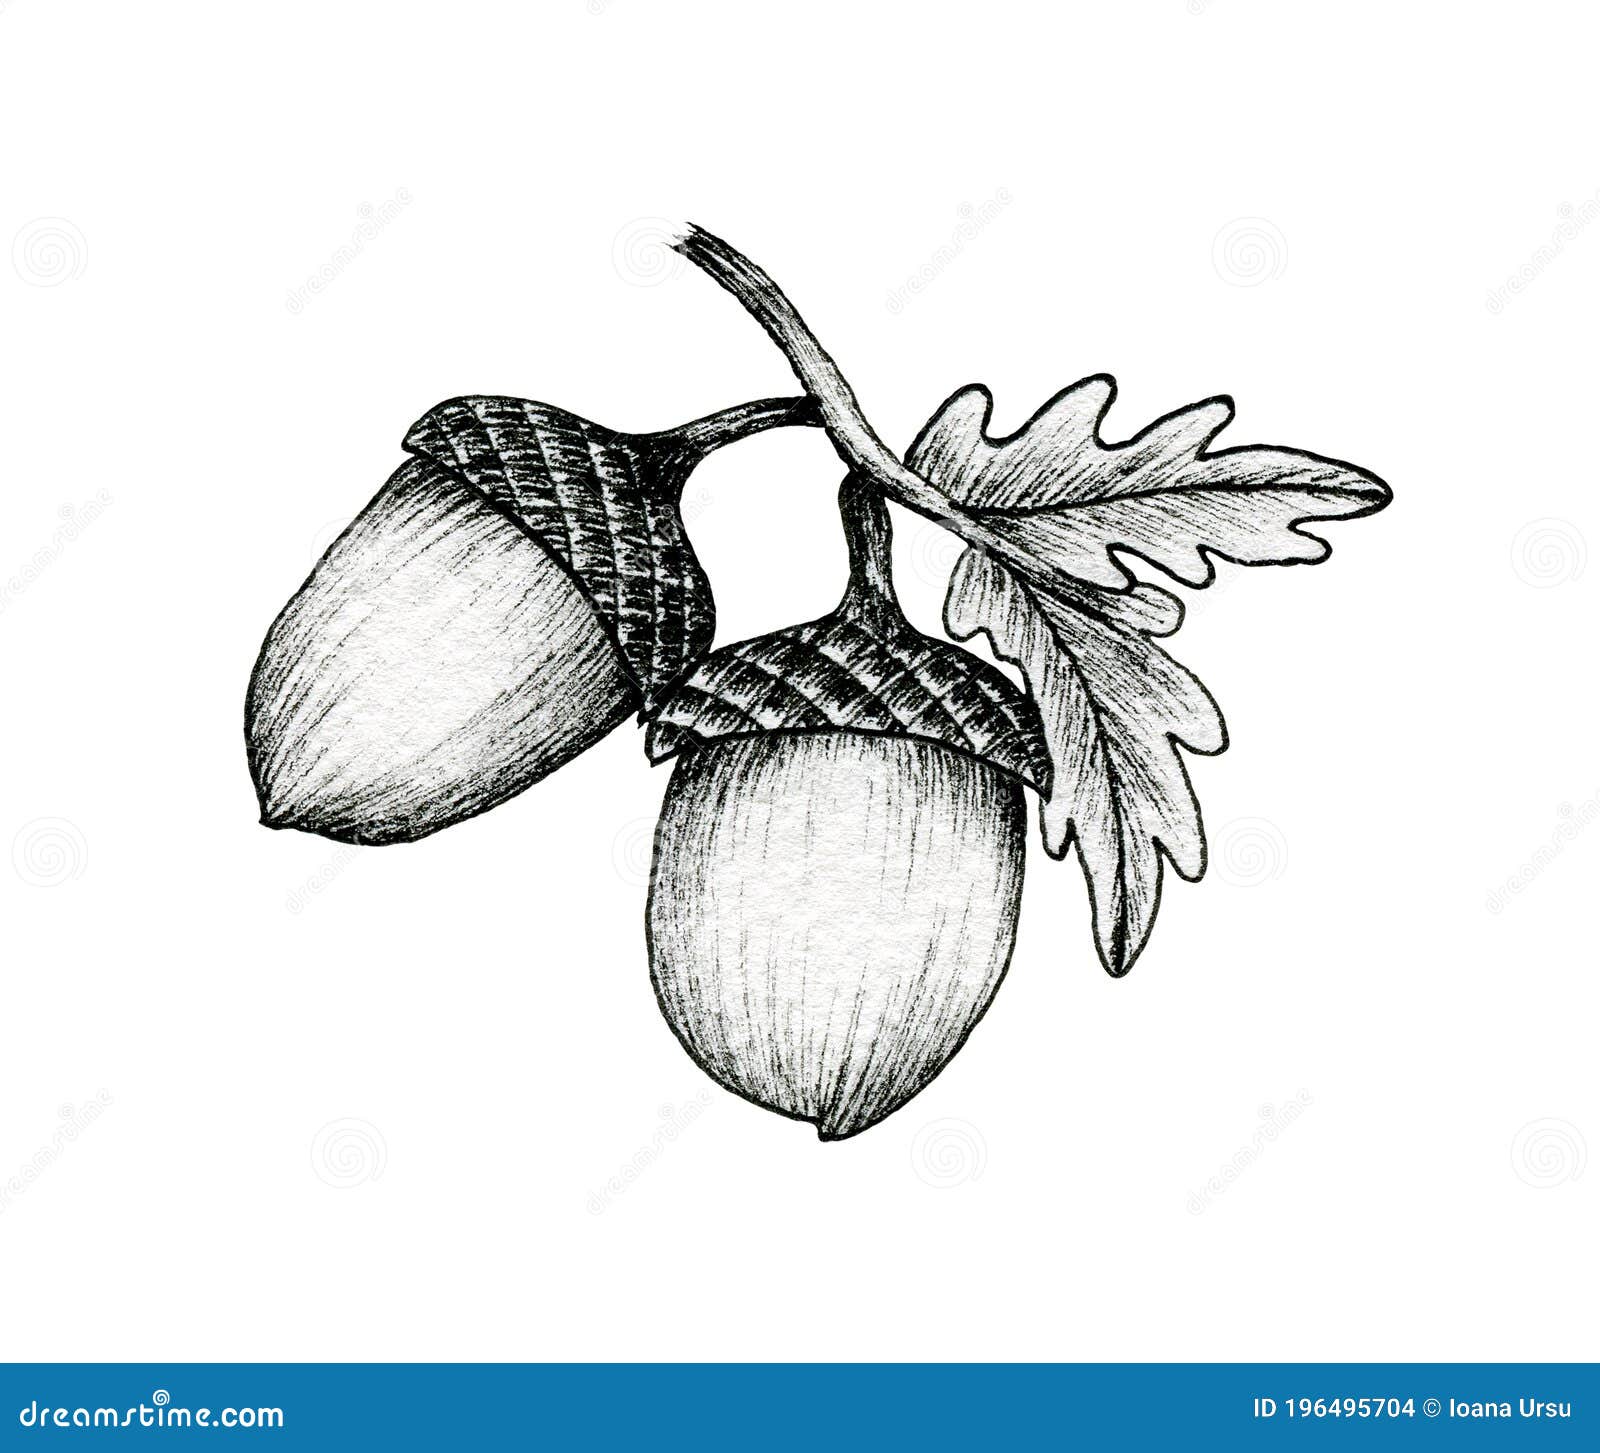 acorns on a branch  on white, black and white ink drawing of autumn acorns and oak leaves, vintage autumnal line art